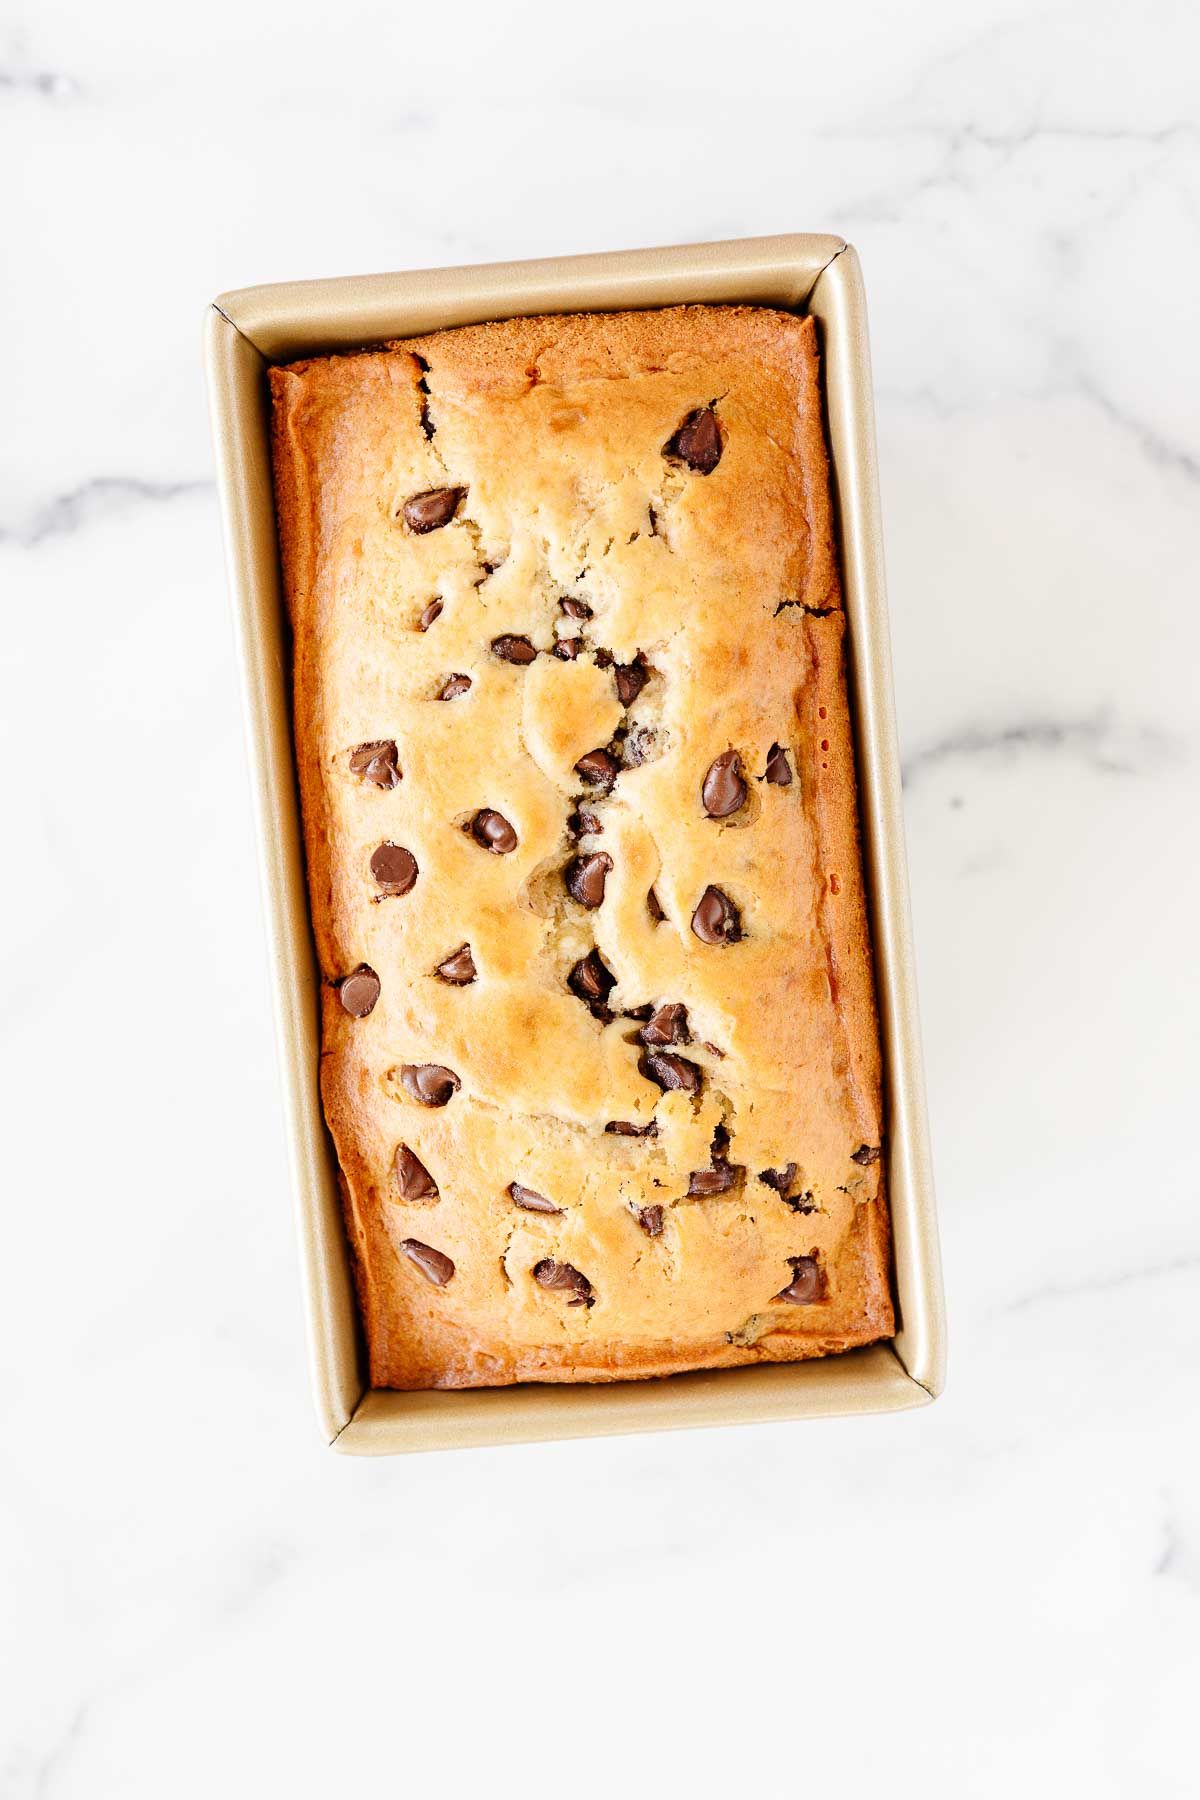 A chocolate chip loaf inside a gold loaf pan.